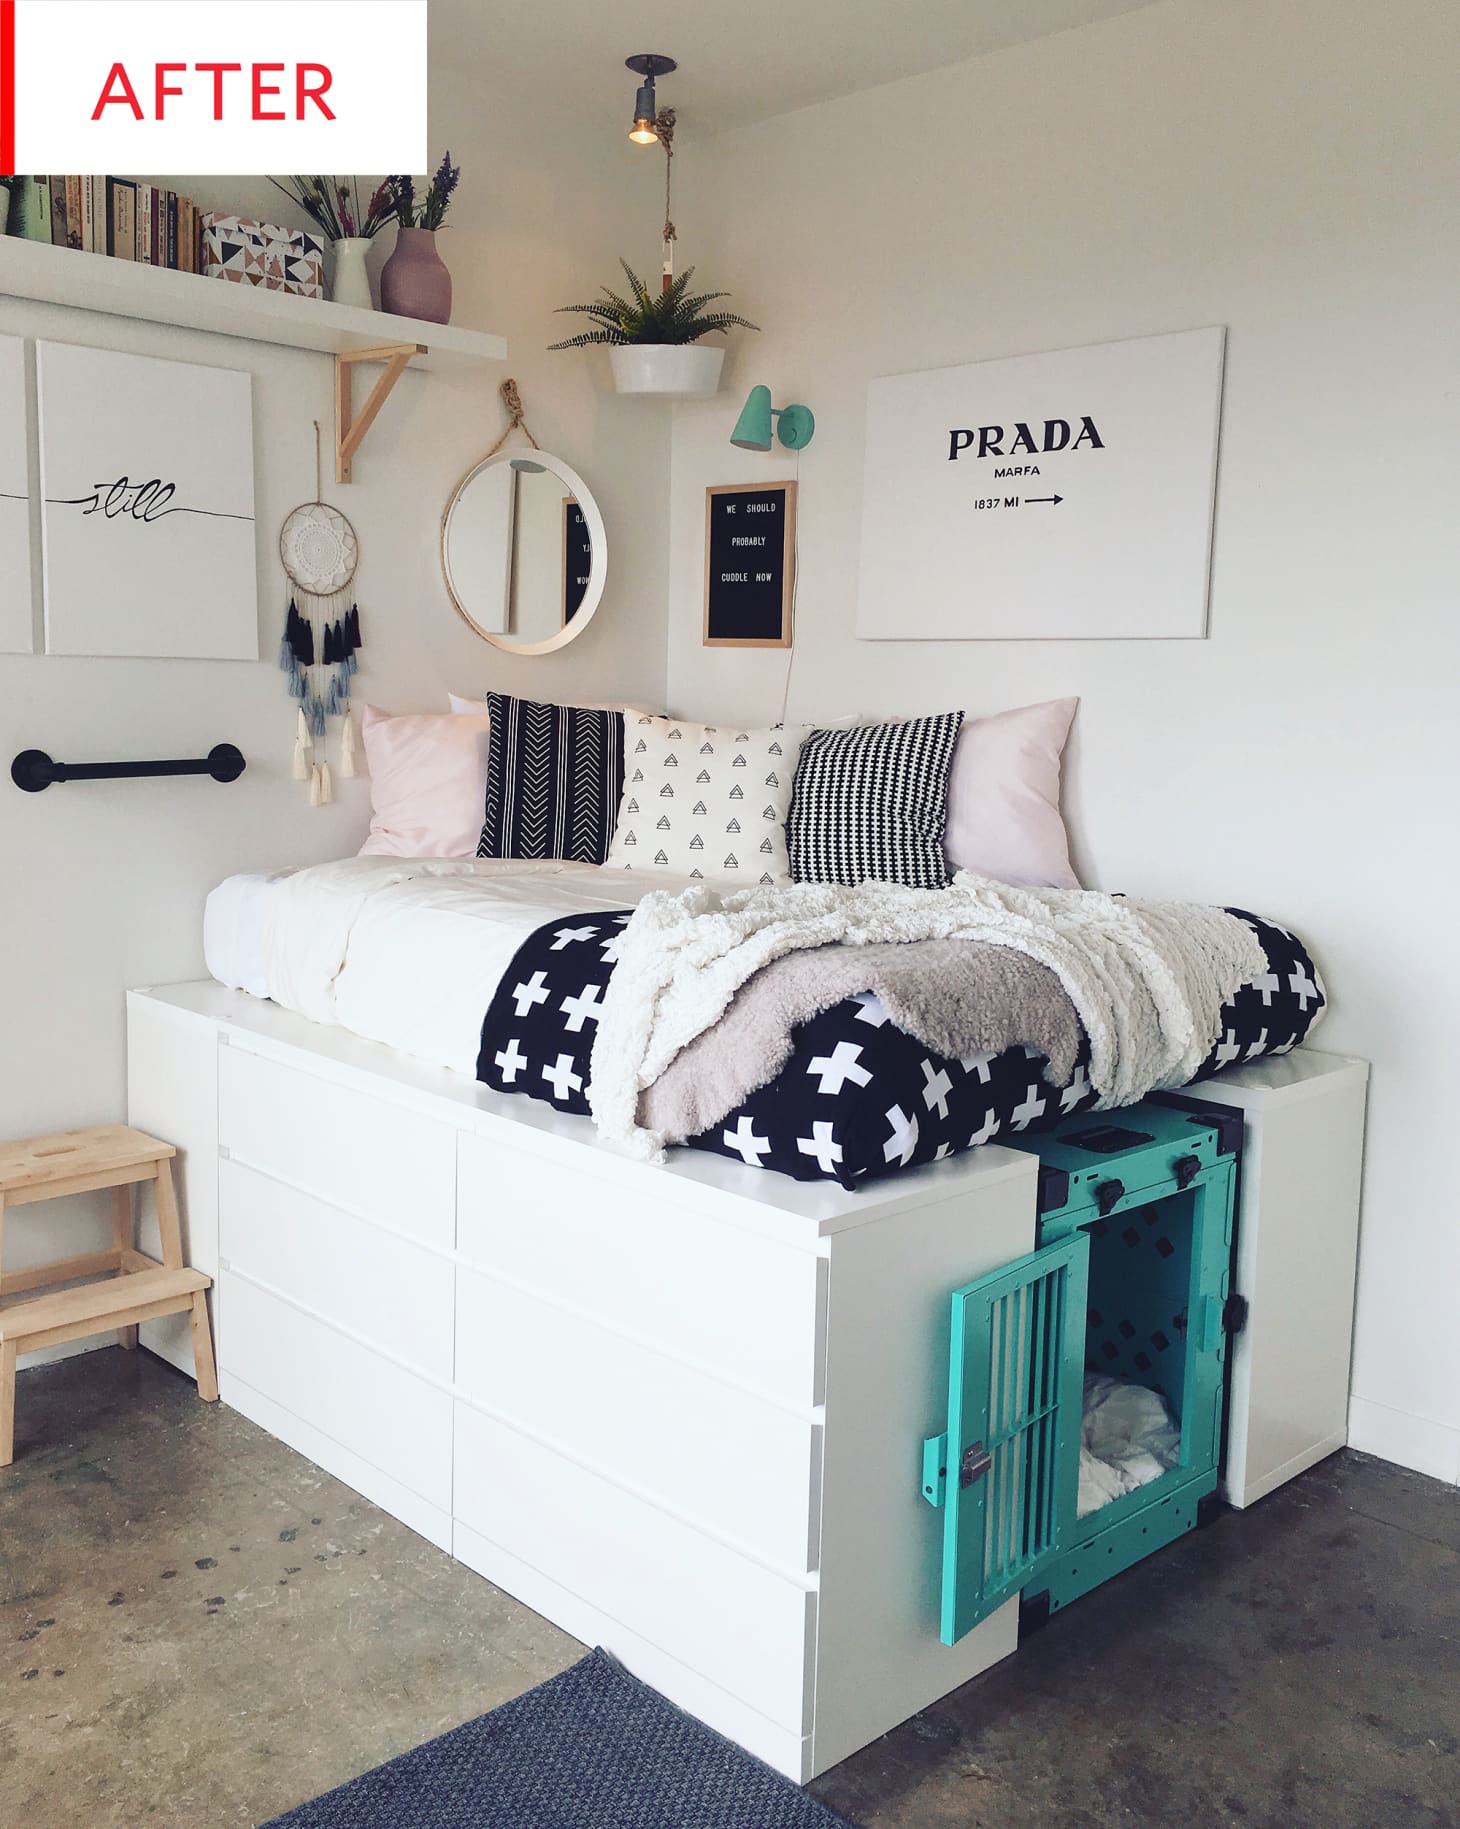  Ikea Hacks Beds for Large Space